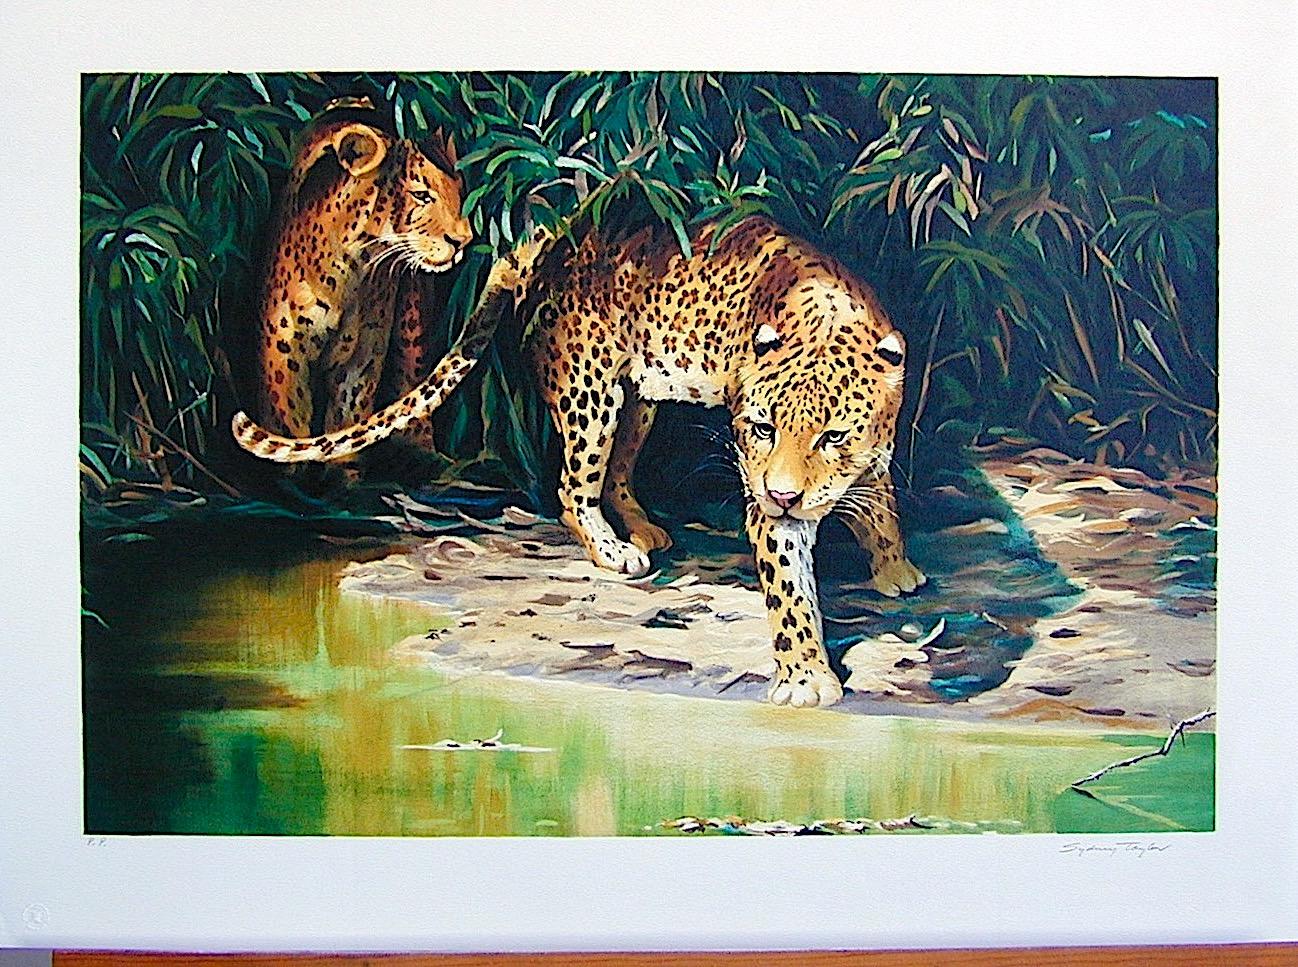 OUT OF THE SHADOWS by the British wildlife artist Sydney Taylor, is an original hand drawn limited edition lithograph printed using traditional hand lithography techniques on archival Somerset paper 100% acid free. OUT OF THE SHADOWS is a